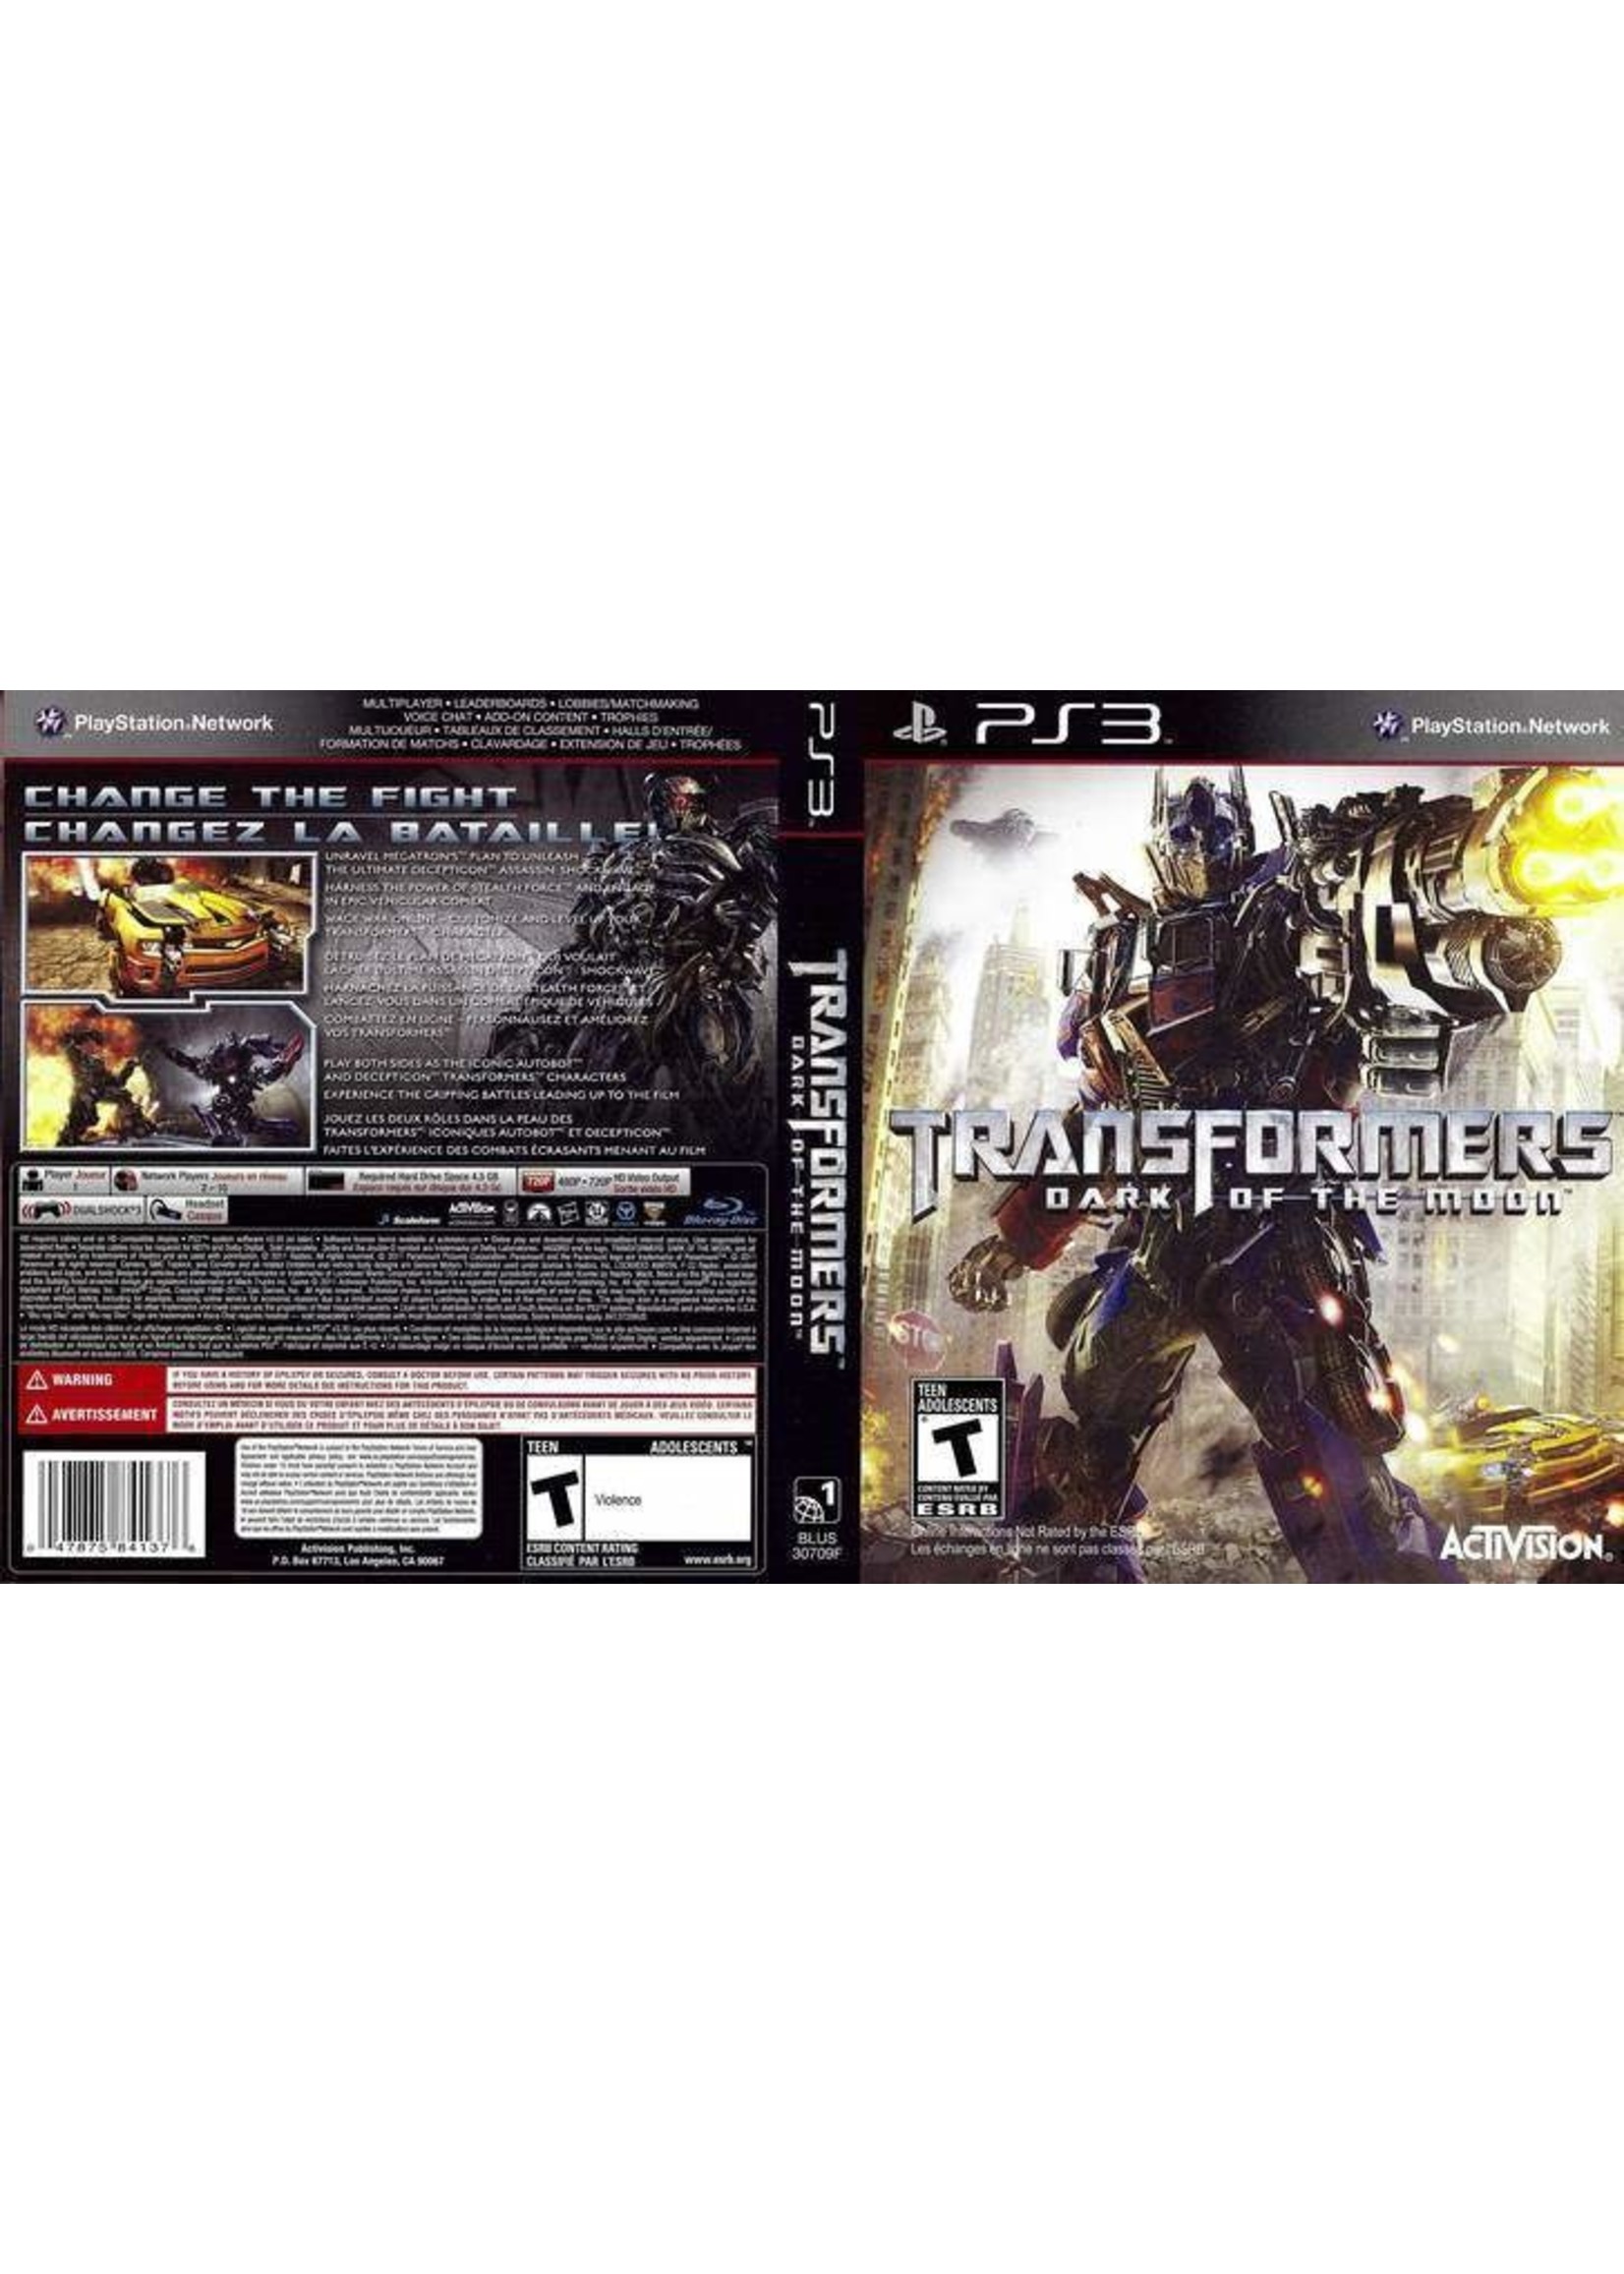 Sony Playstation 3 (PS3) Transformers: Dark of the Moon